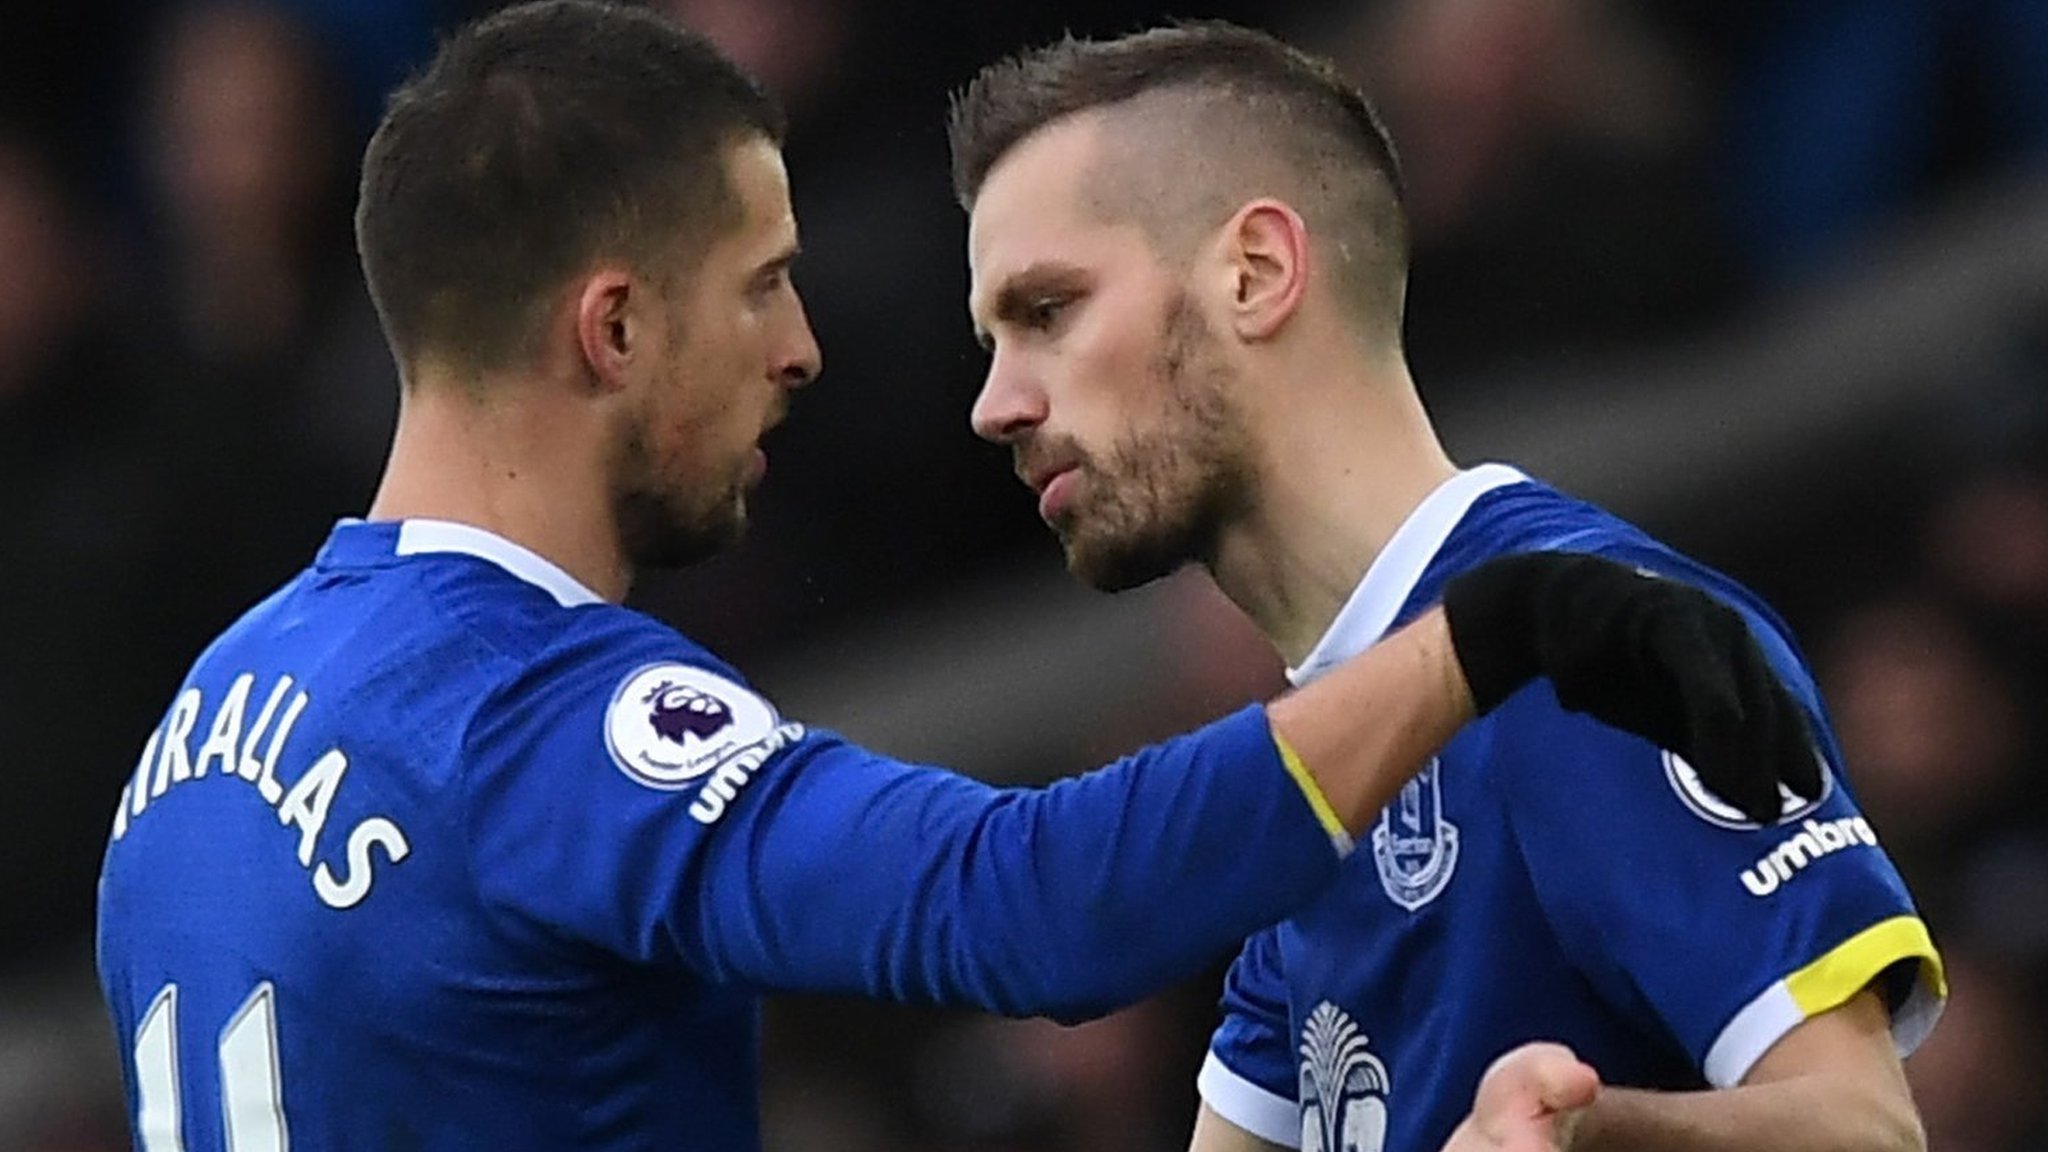 Mirallas apologises for 'frustration' - but denies 'lack of commitment'